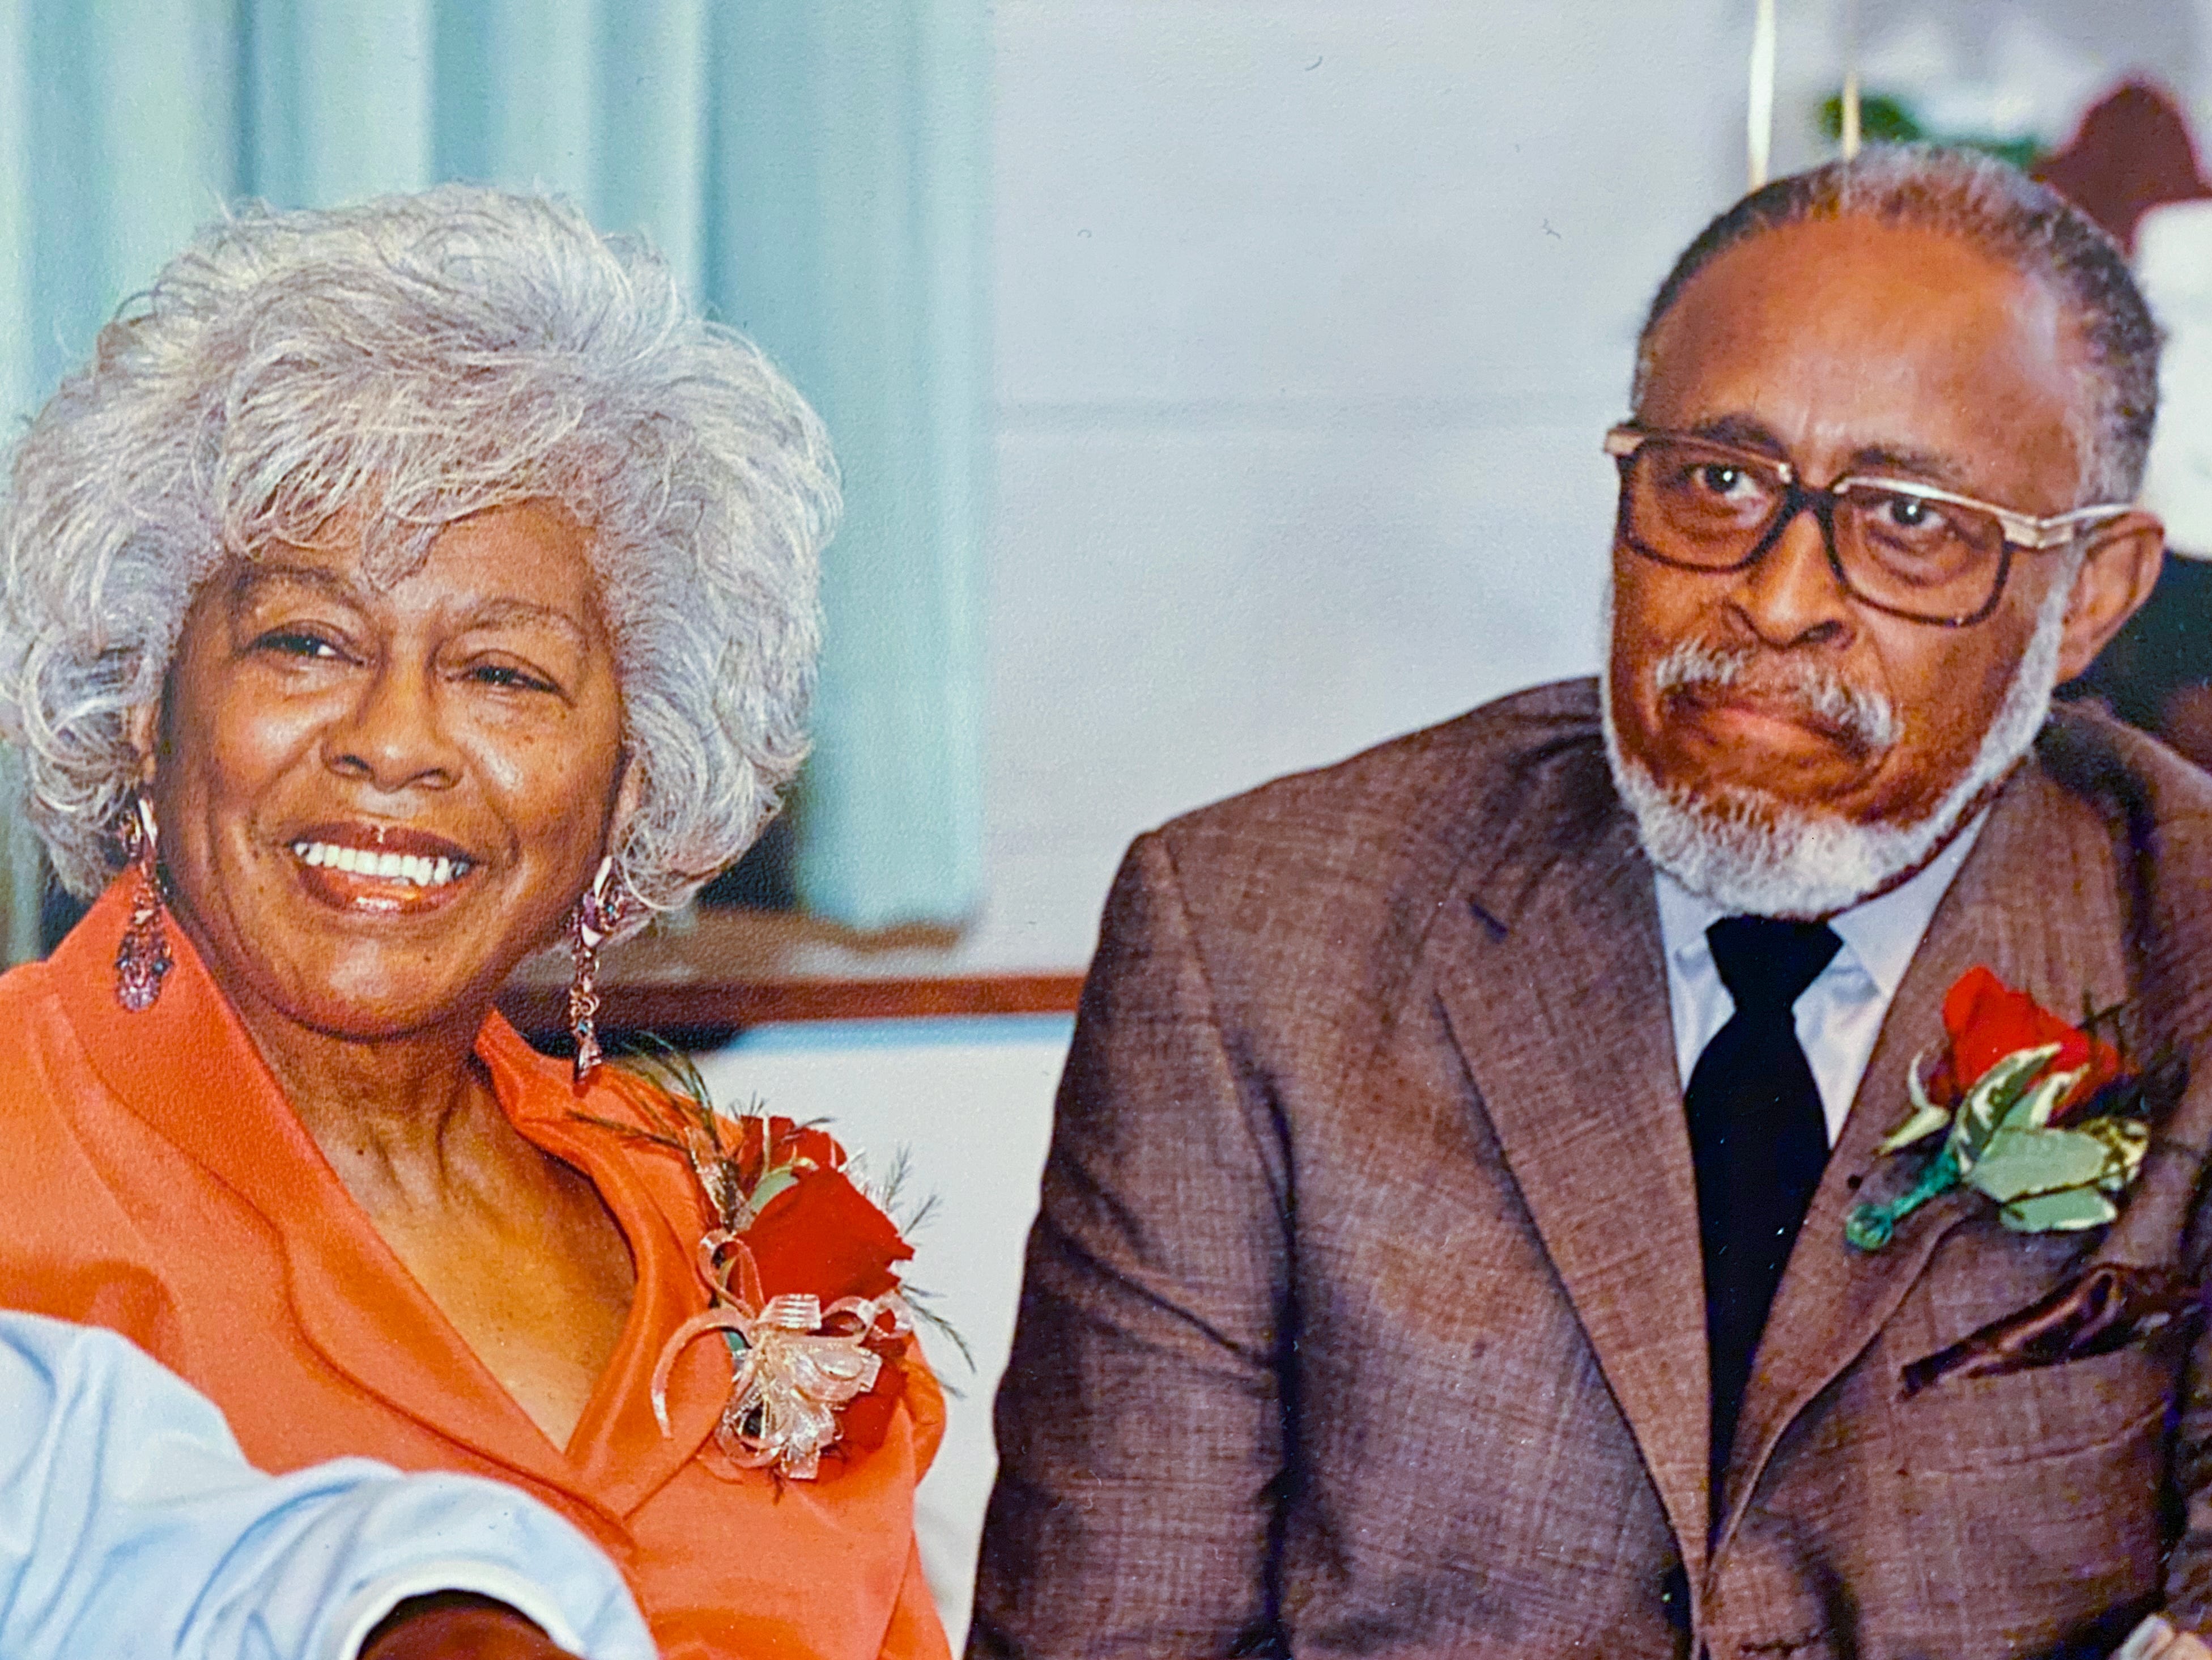 Minister Matilda Bland and Dr. Robert Bland have been married for 65 years. The couple has shared a love for Detroit and a commitment to continuing the work of Dr. Martin Luther King Jr.